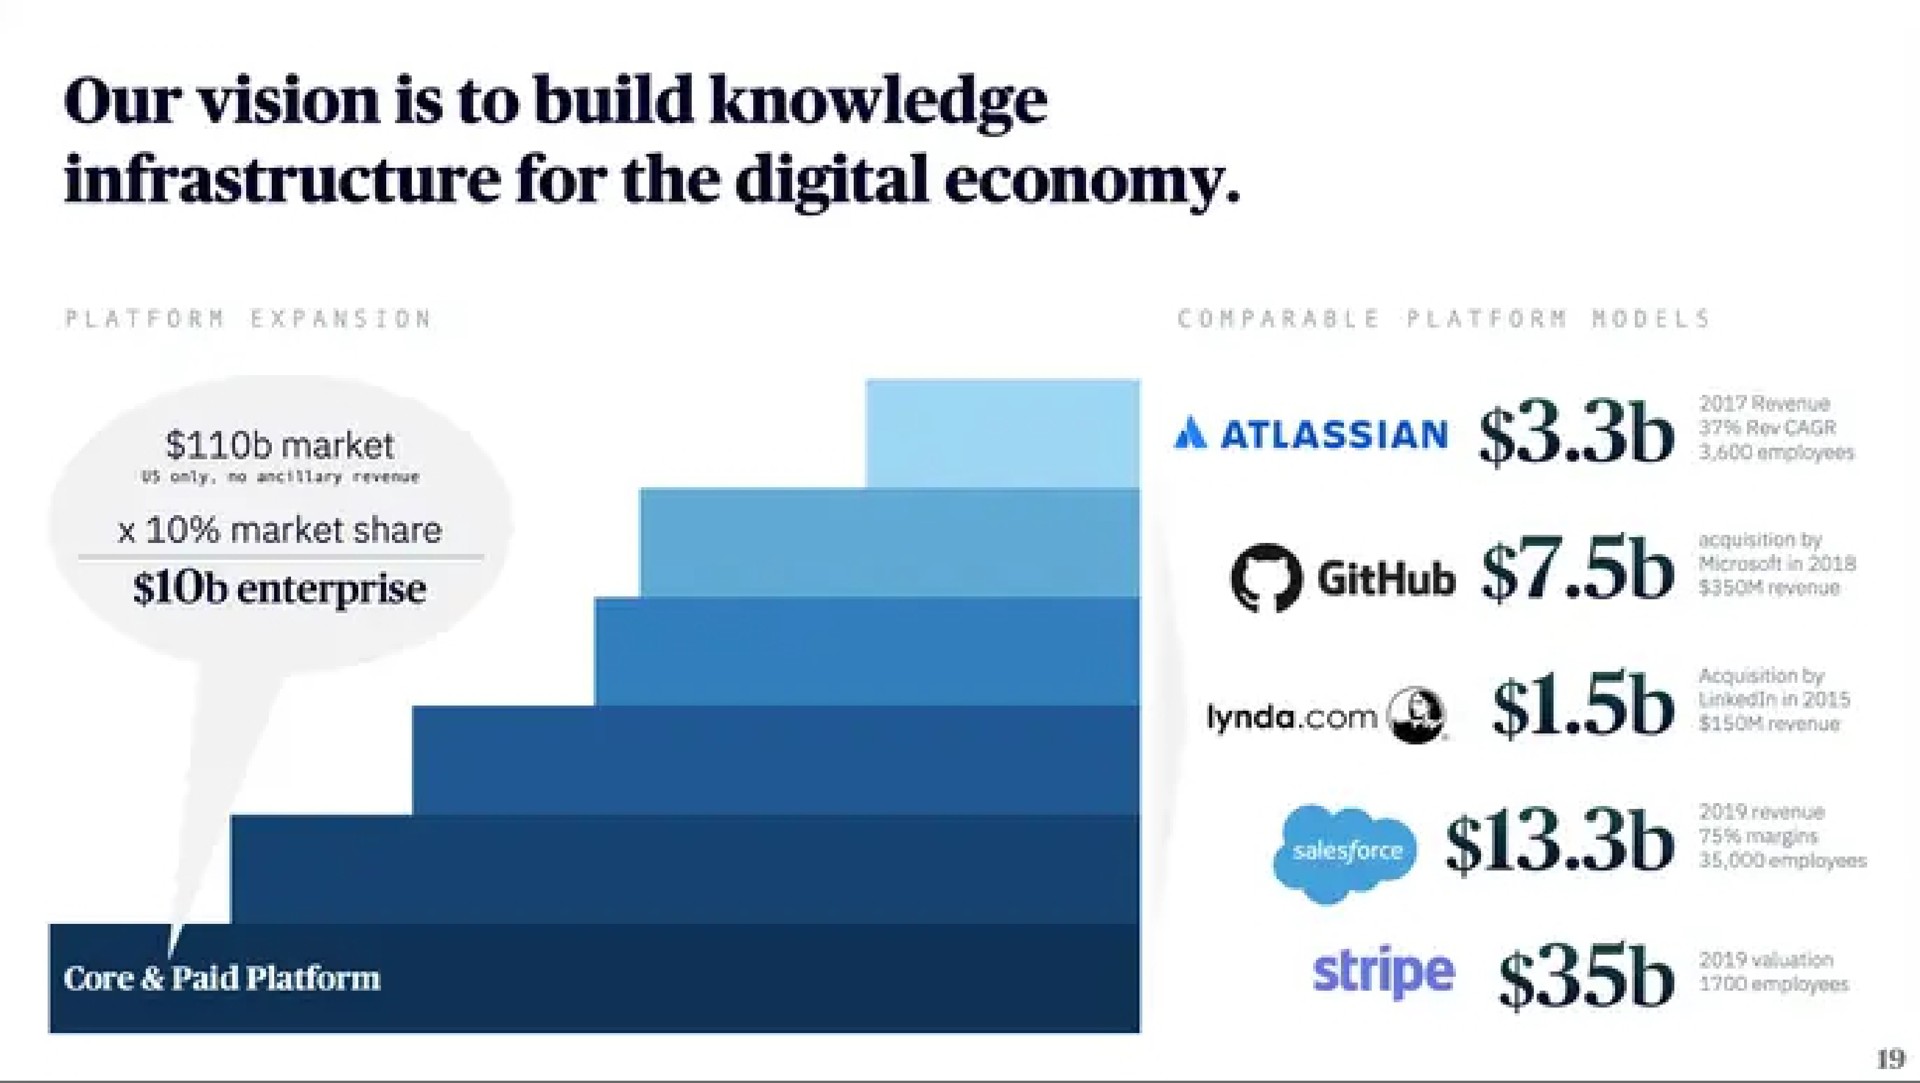 our vision is to build knowledge infrastructure for the digital economy | Almanac